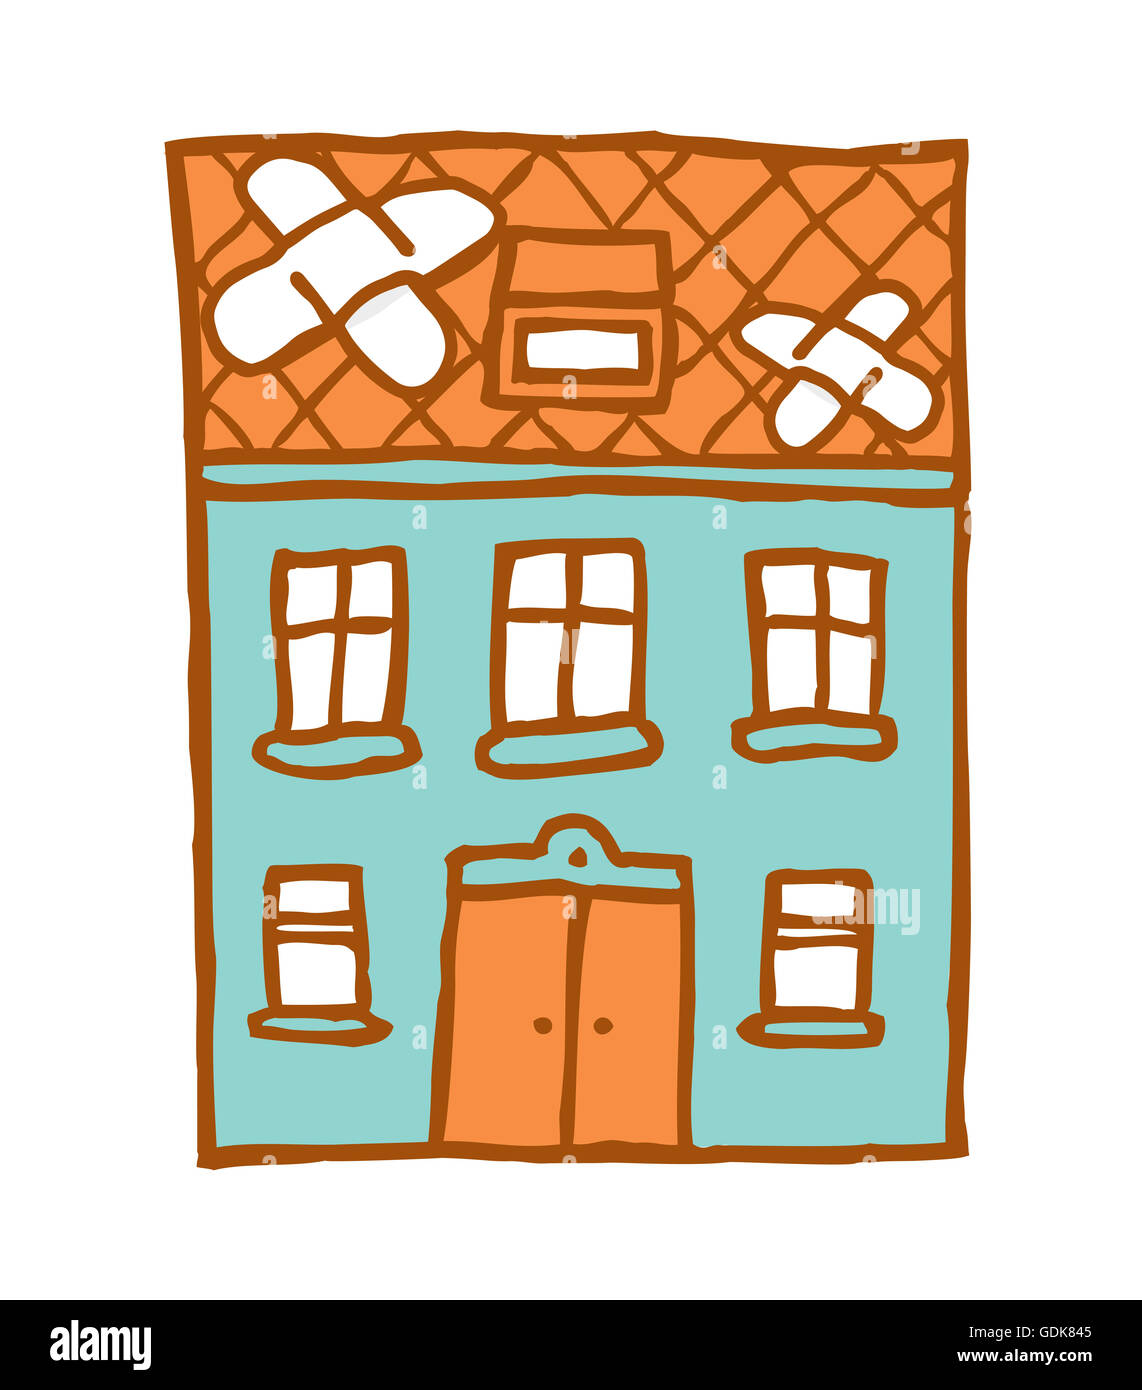 Cartoon ilustration of a broken house with patches of adhesive bandage Stock Photo